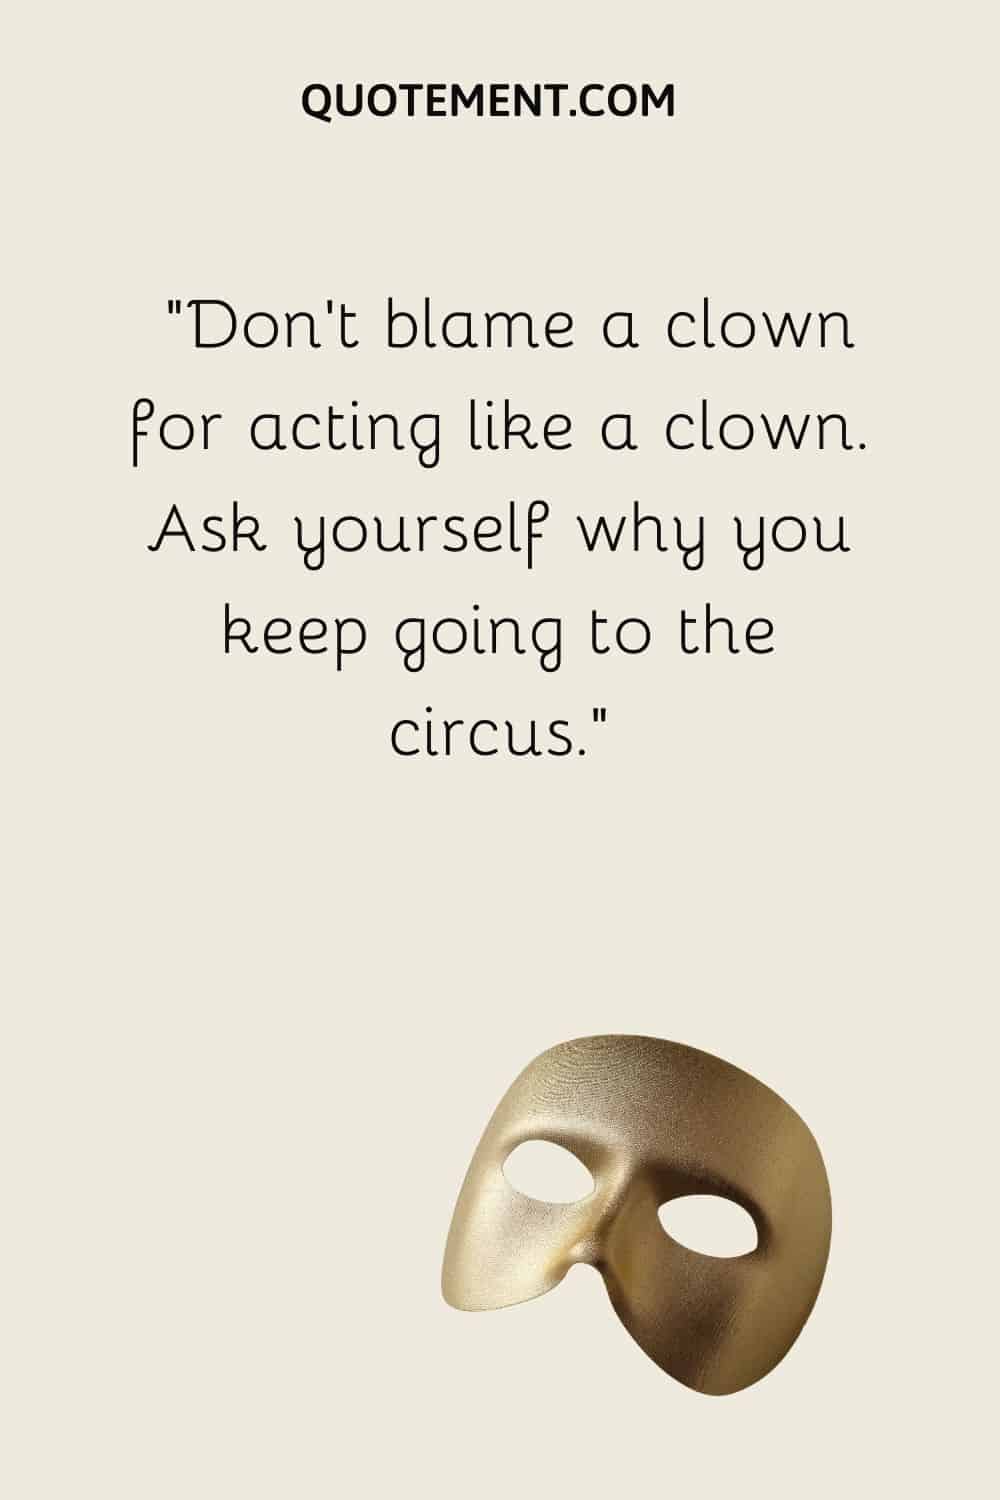 Don’t blame a clown for acting like a clown